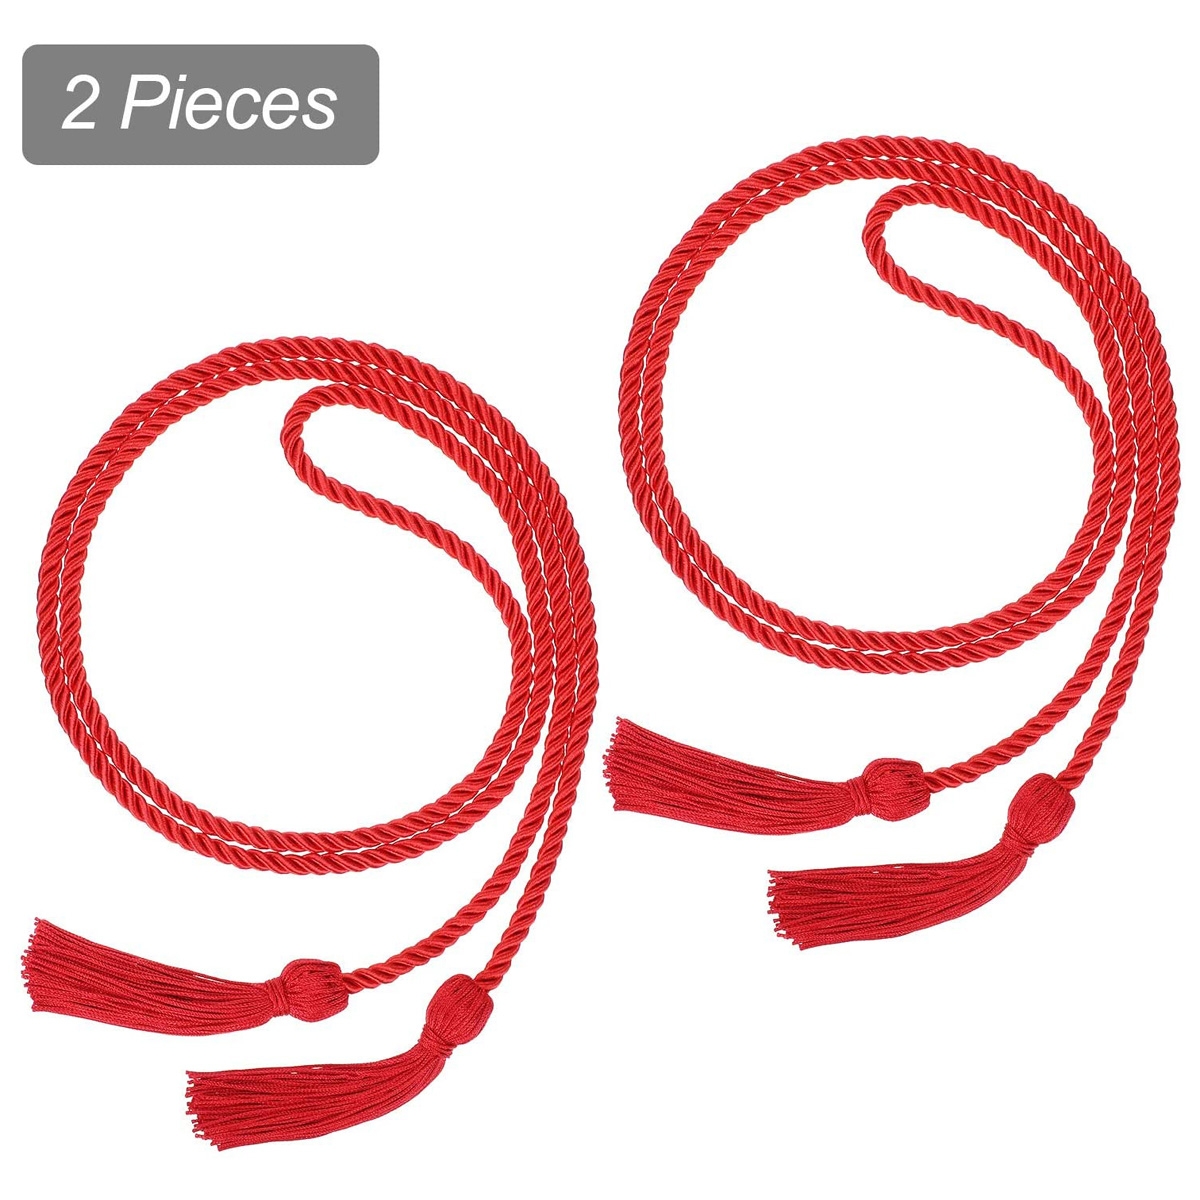 2 Pieces Graduation Cords Polyester Yarn Honor Cord with Tassel for Graduation Students (Red)